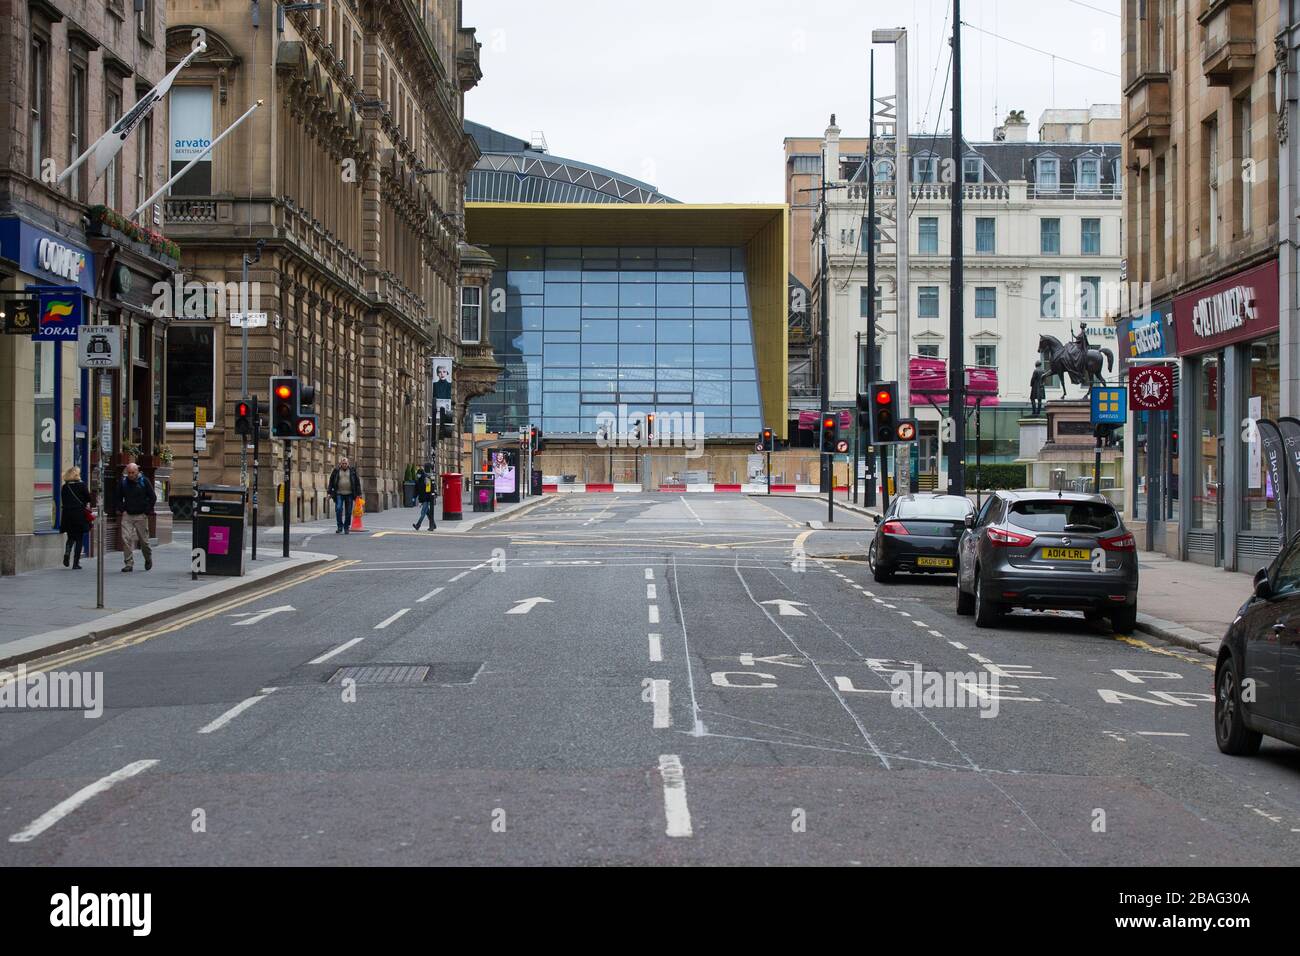 Glasgow, UK. 27th Mar, 2020. Pictured: Views of Glasgow City Centre showing empty streets, shops closed and empty railway stations during what would normally be a busy street scene with shoppers and people working within the city. The Coronavirus Pandemic has forced the UK Government to order a shut down of all the UK major cities and make people stay at home. Credit: Colin Fisher/Alamy Live News Stock Photo